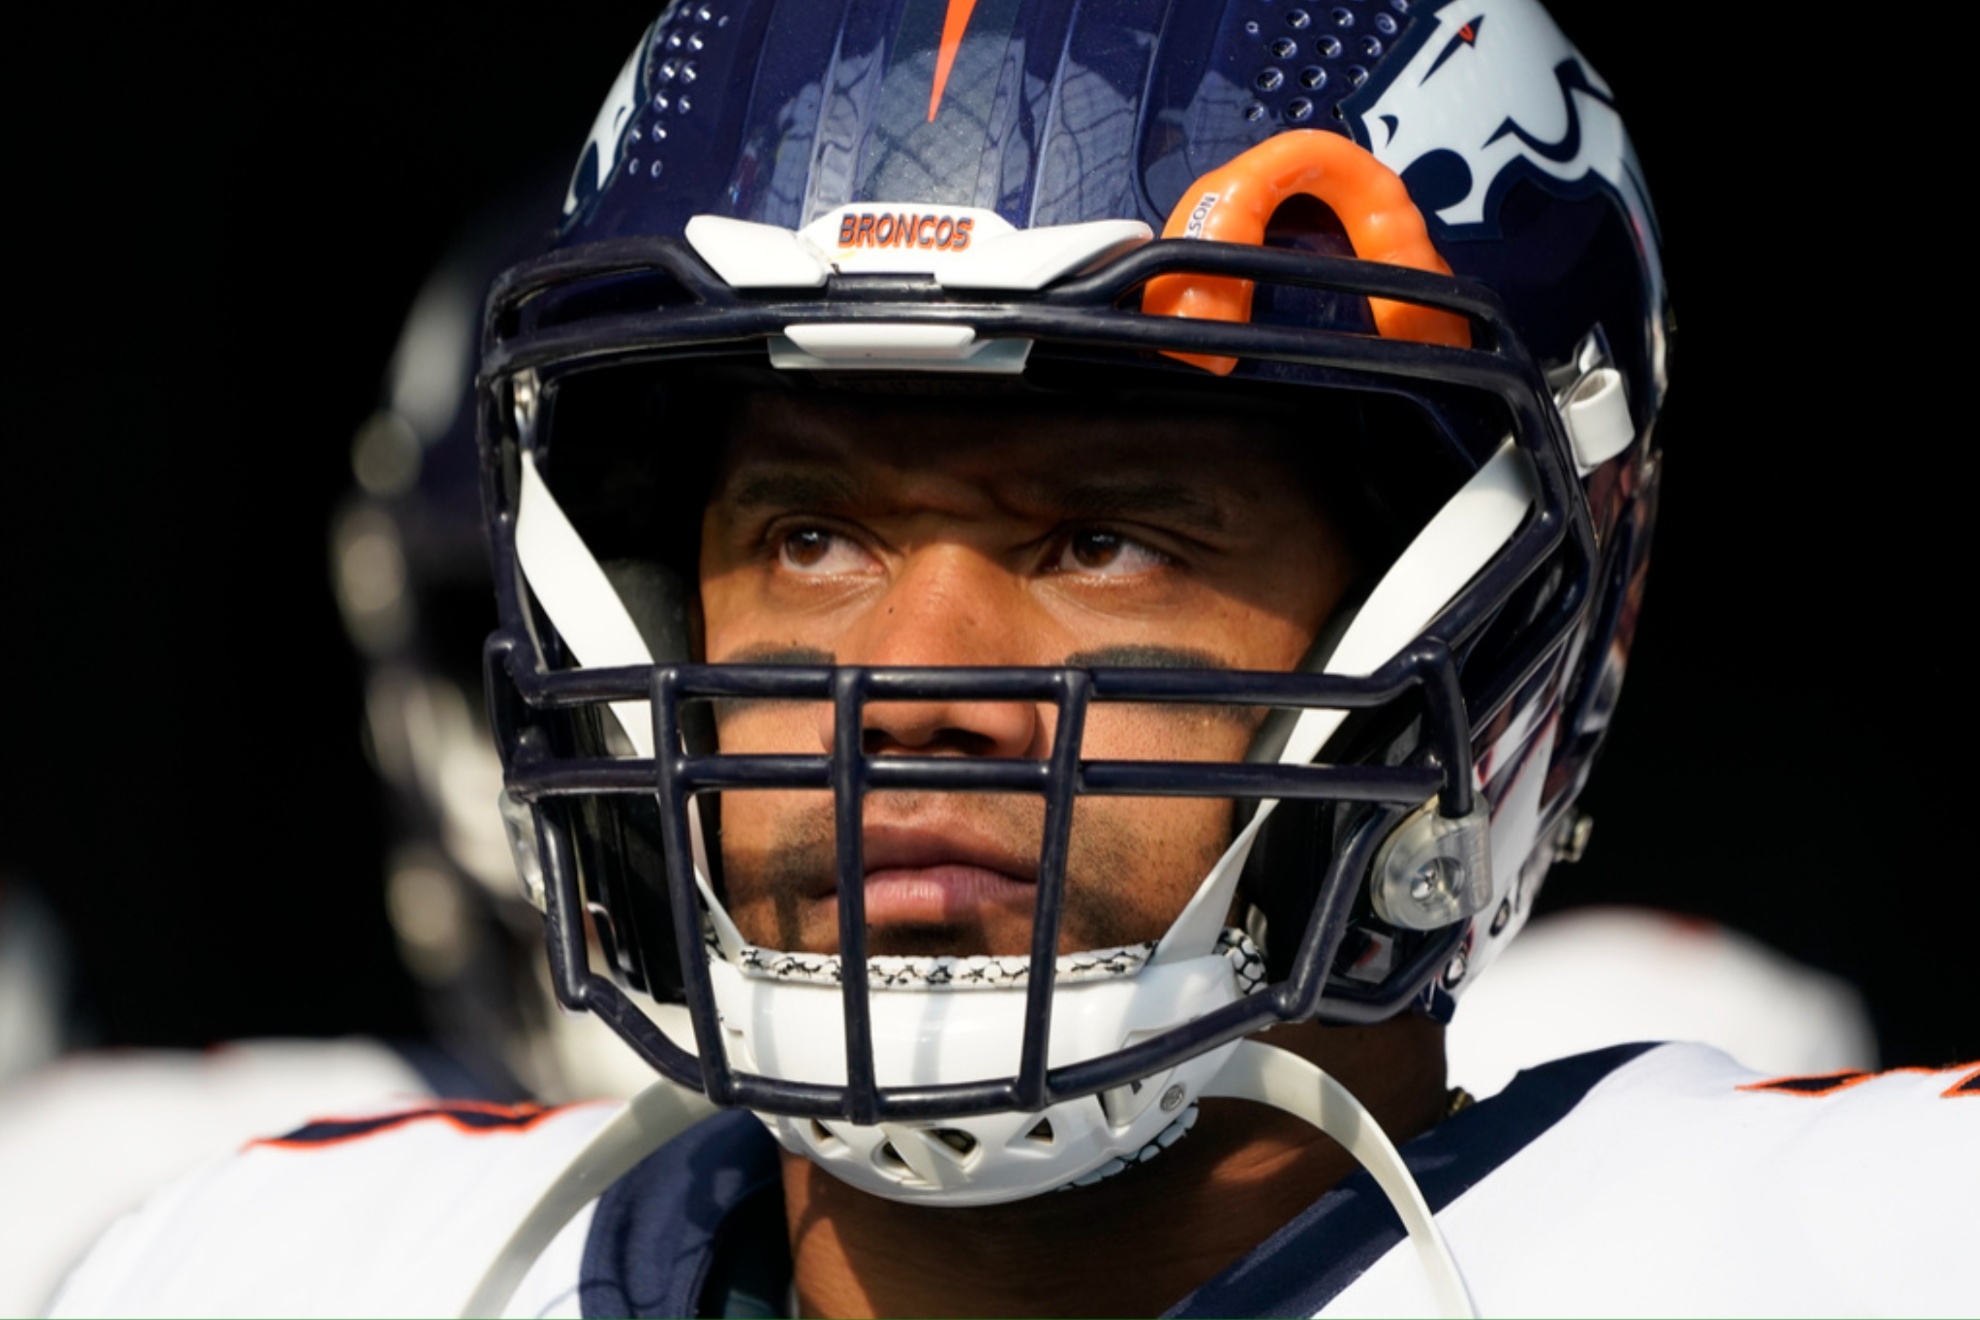 Russell Wilson spent two seasons with the Denver Broncos